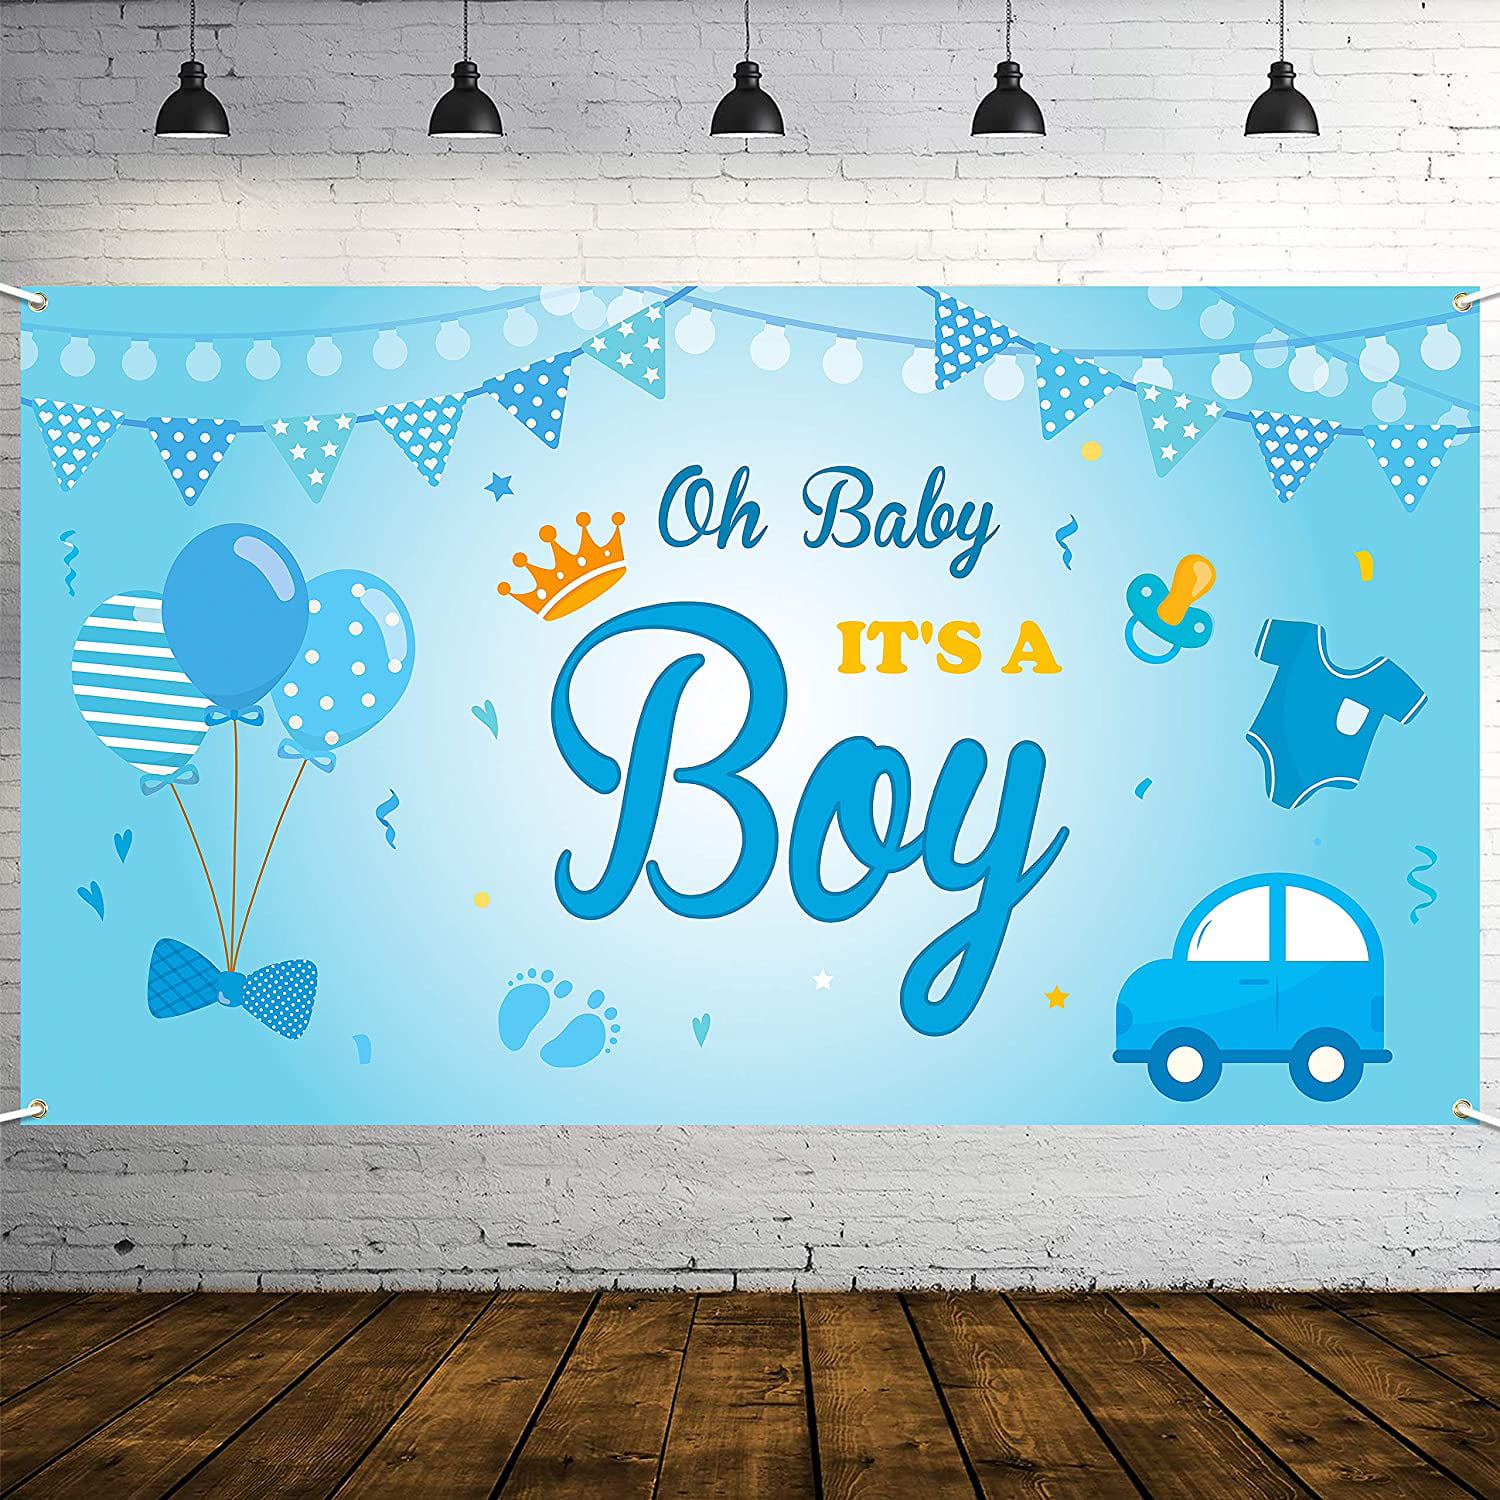 Blue baby foot garland for baby shower nursery decoration and Happy Birthday Decor No DIY required welcoming newborn